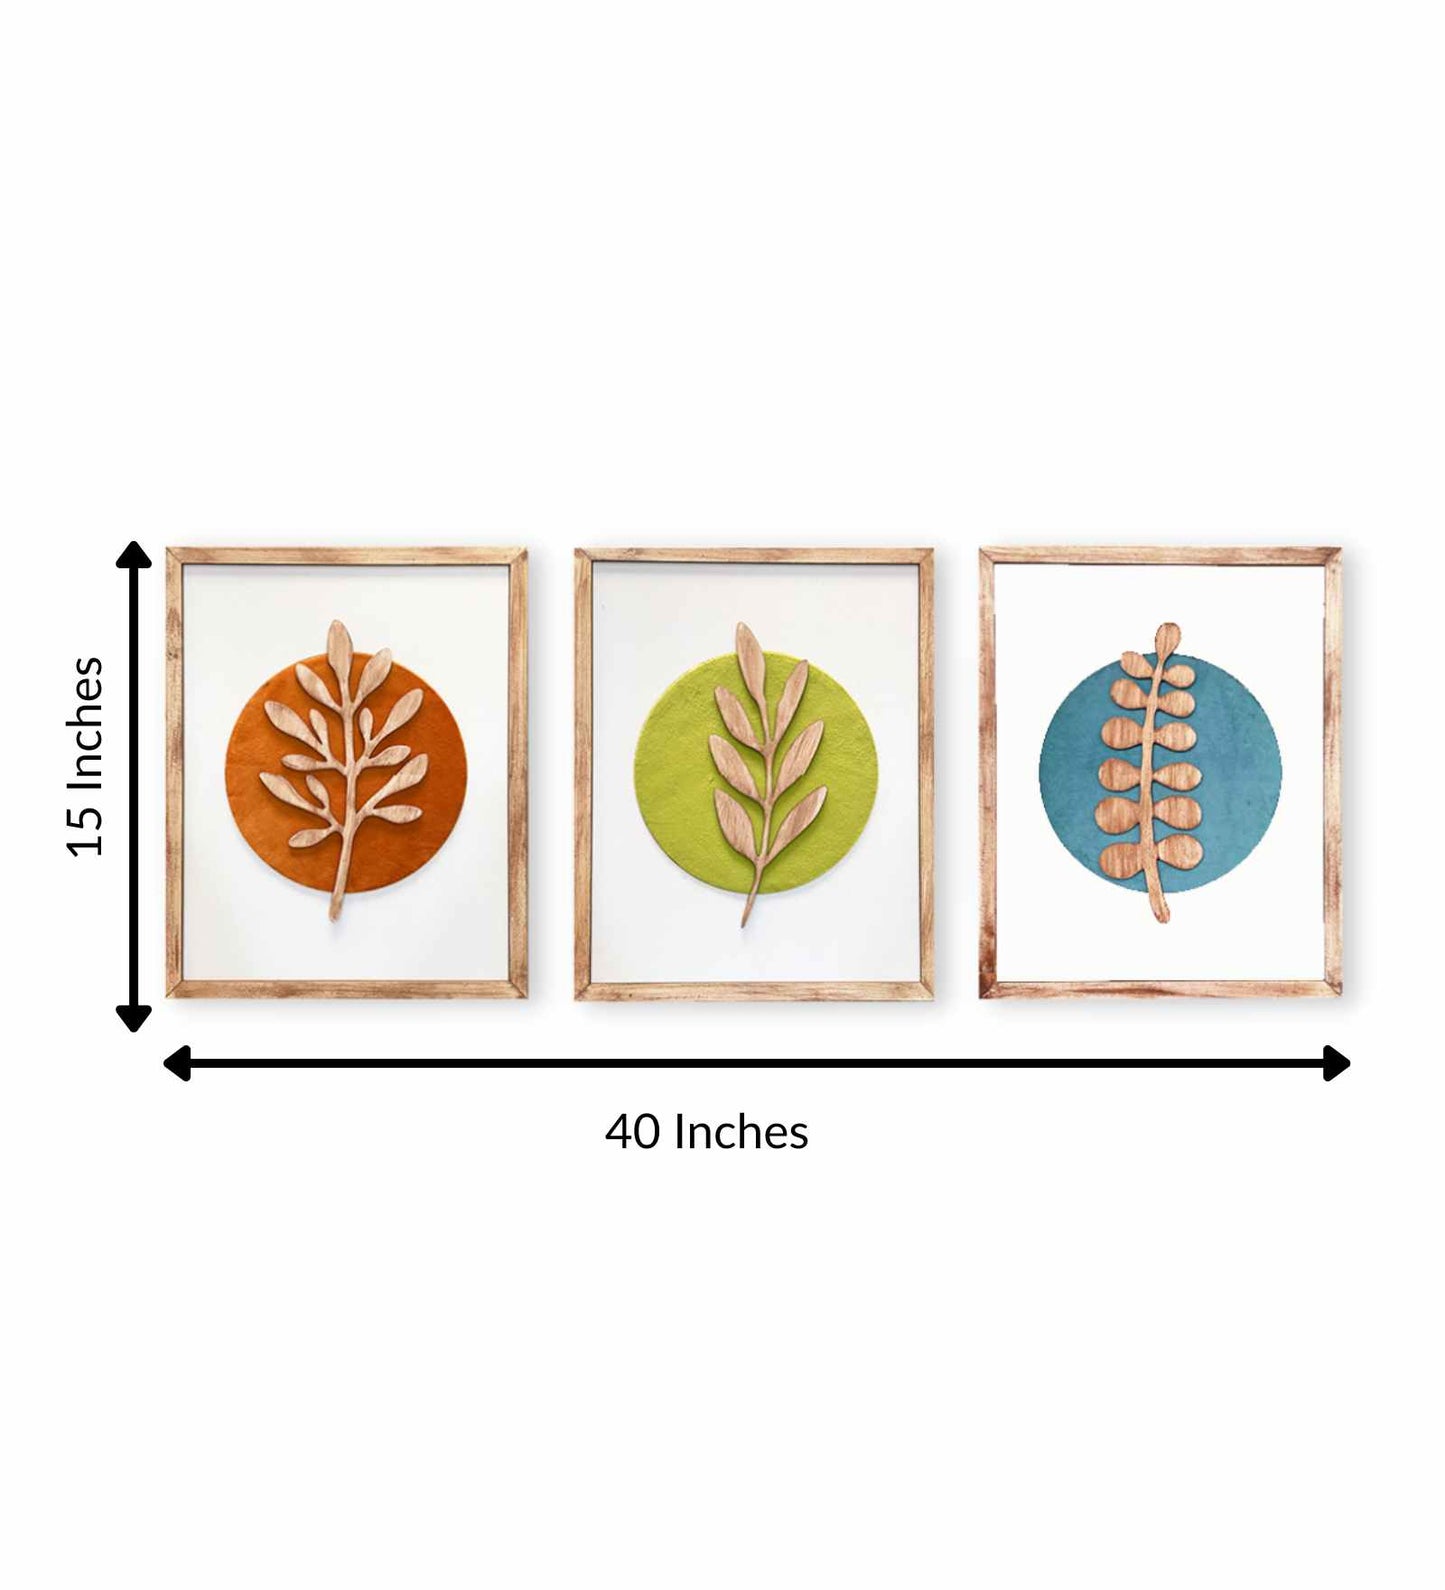 Set of 3 Botanical Modern Wooden Wall Arts 16 Inches x 40 Inches